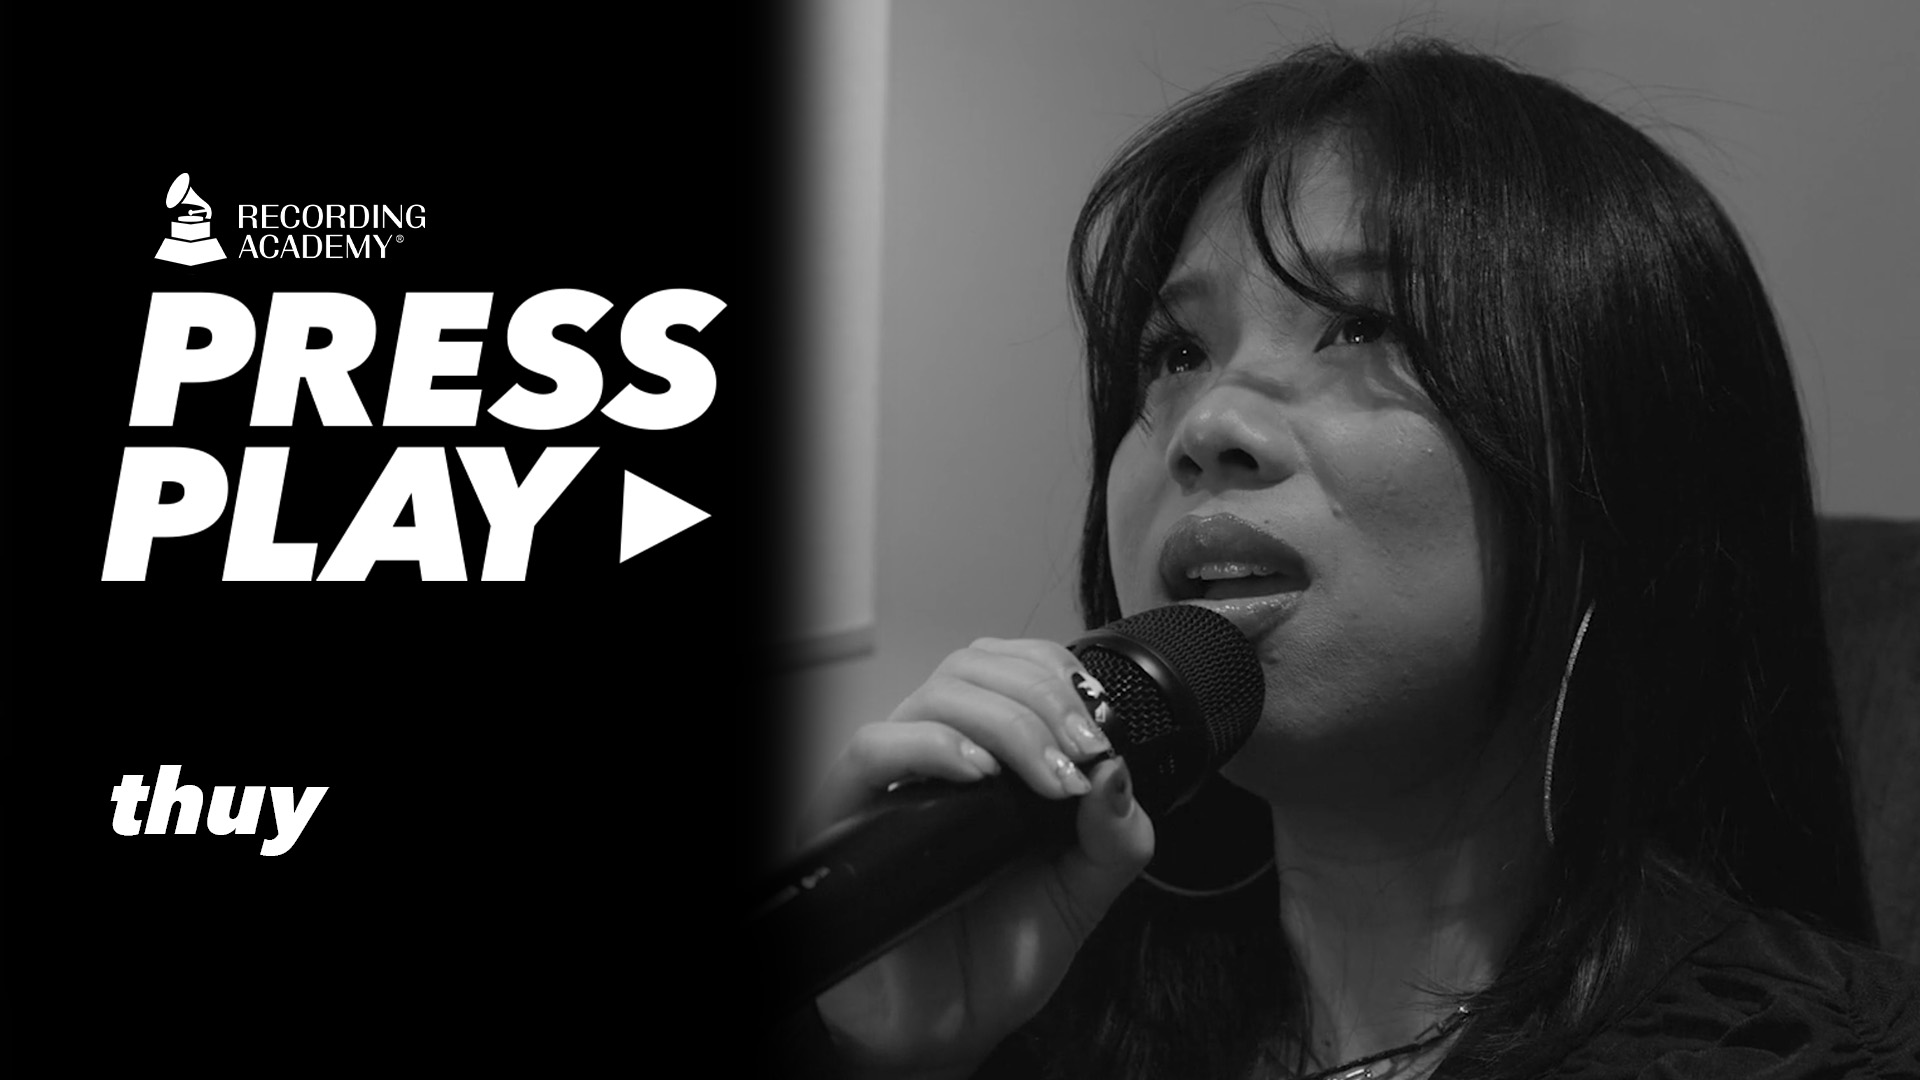 Watch Thuy Perform "Girls Like Me Don't Cry"